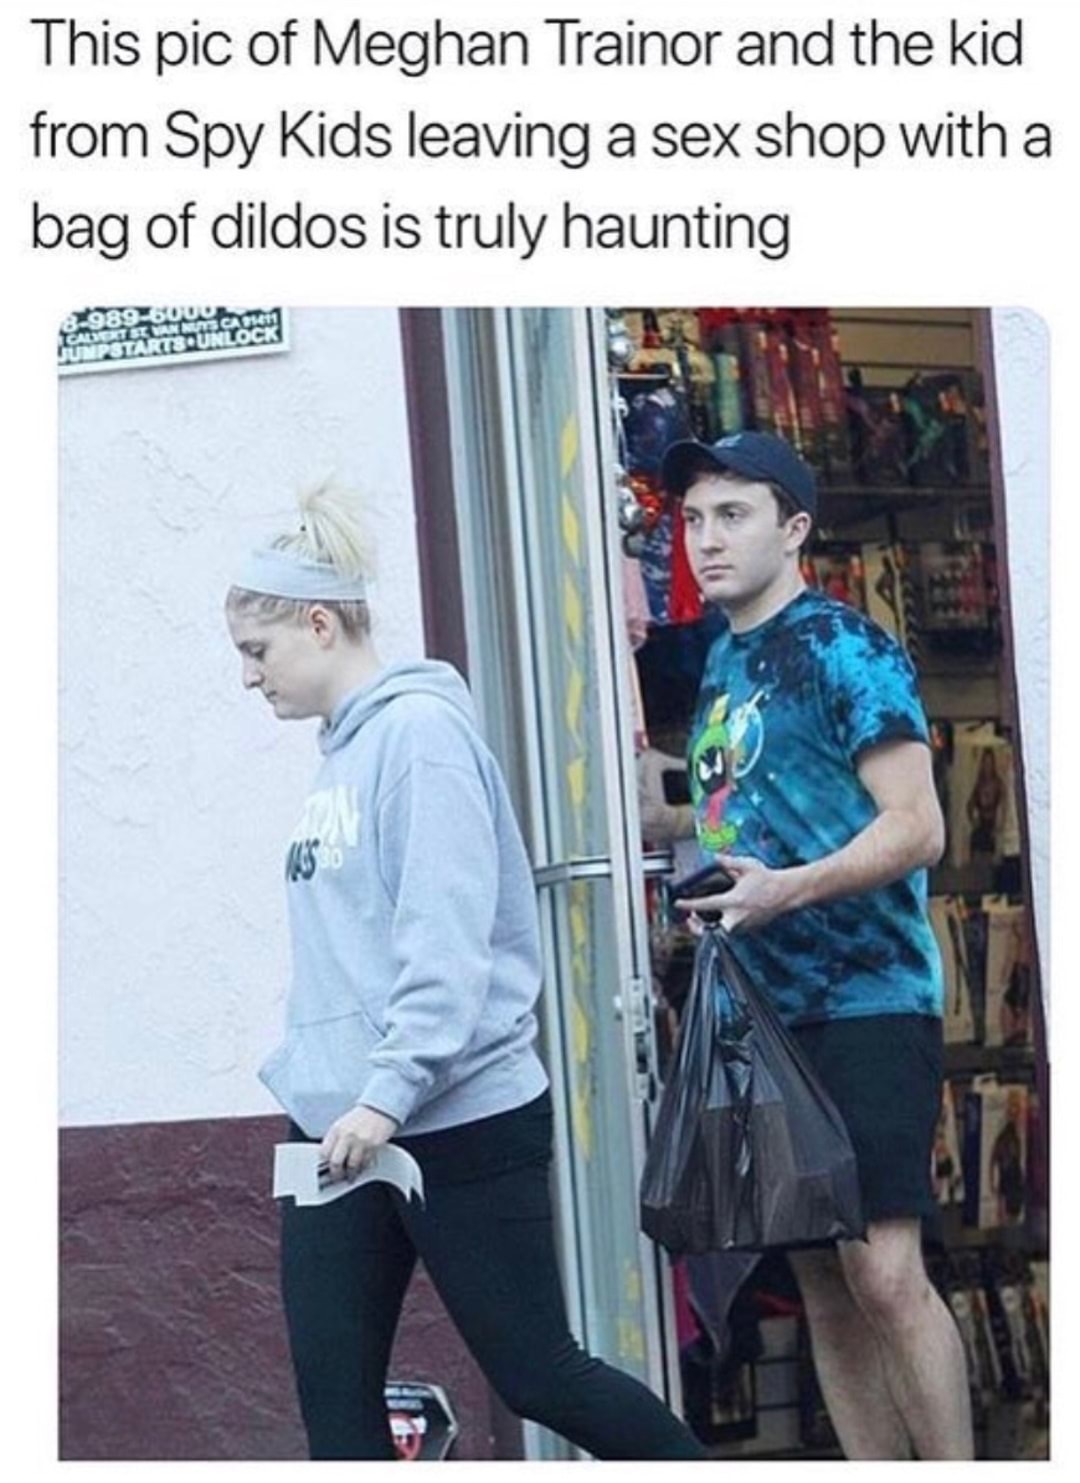 funny meme - meghan trainor spy kids - This pic of Meghan Trainor and the kid from Spy Kids leaving a sex shop with a bag of dildos is truly haunting Chant